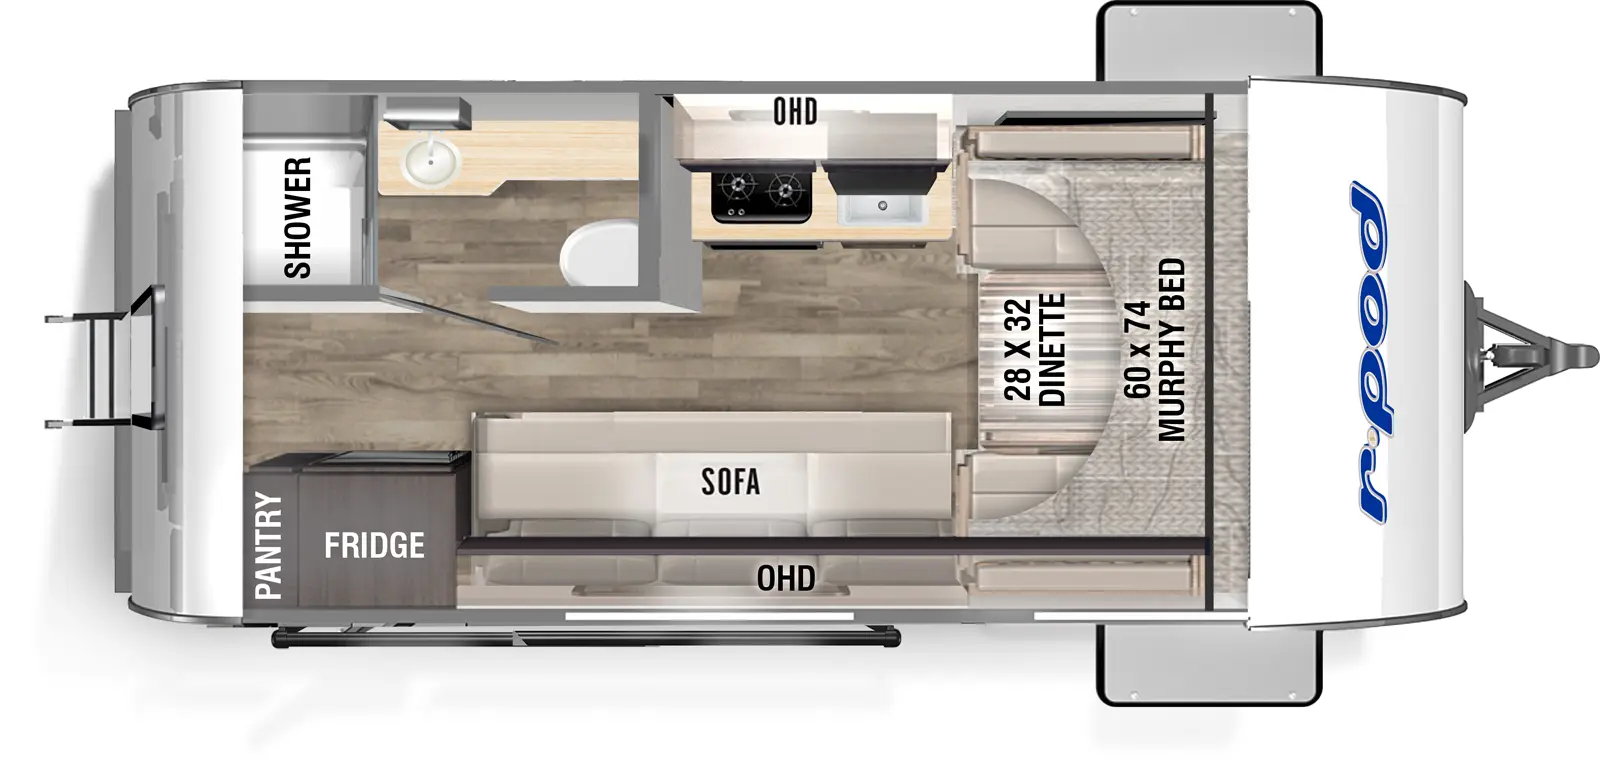 The RP-153C has zero slideouts and one entry. Interior layout front to back: front murphy bed dinette, off-door side kitchen counter with sink, cooktop, and overhead cabinet, door side sofa and over head cabinet, rear off-door side full bathroom, rear door side refrigerator and pantry, and rear entry door.